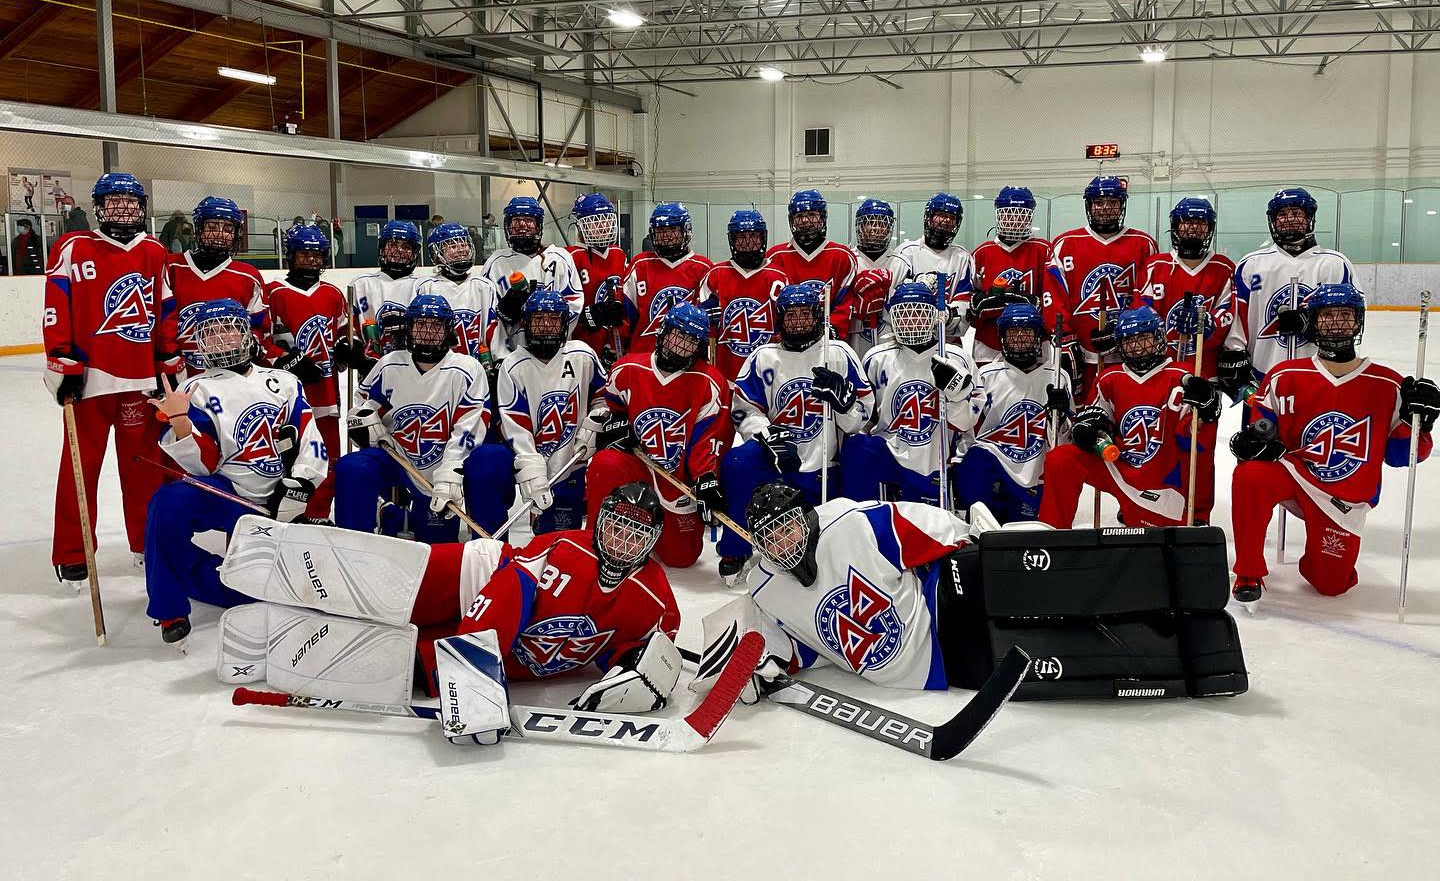 Exhibition Game - U14AA Red and U14AA Blue